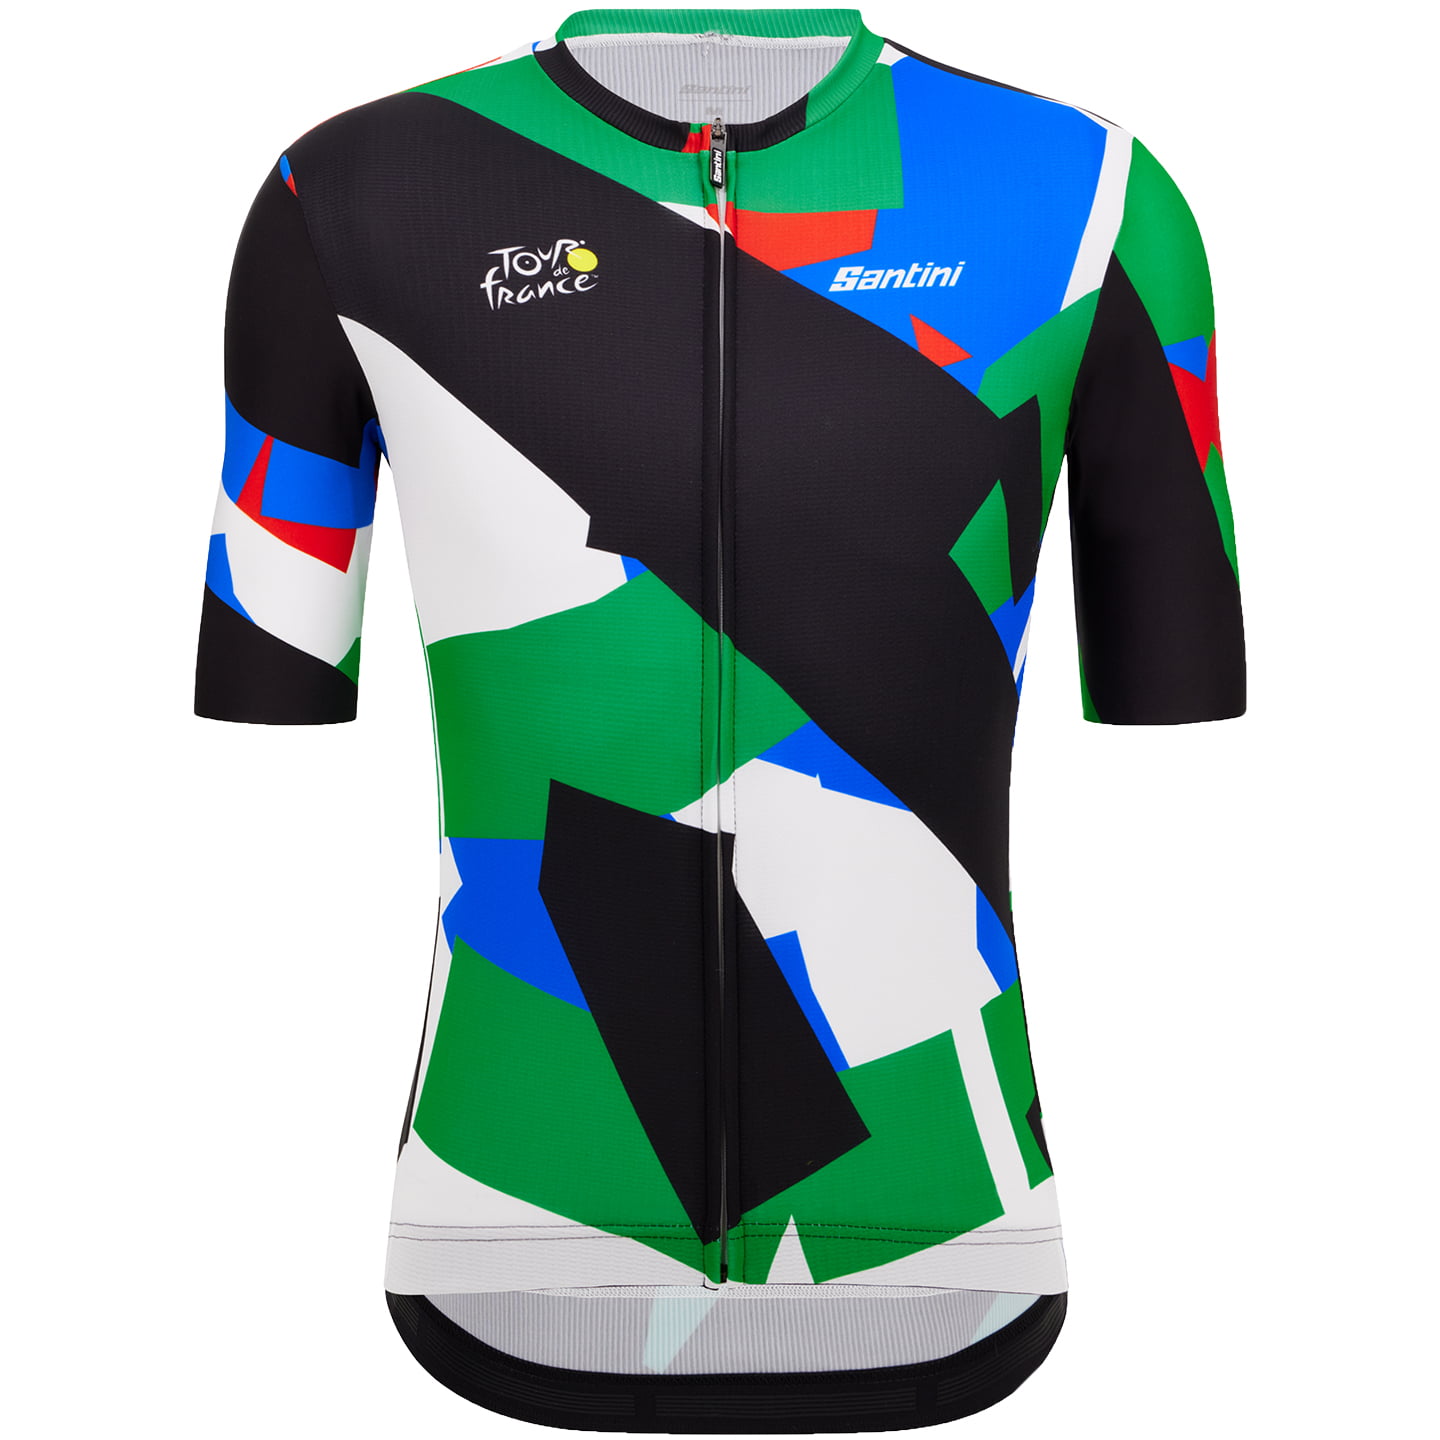 TOUR DE FRANCE Mont Blanc-Courchevel 2023 Short Sleeve Jersey, for men, size M, Cycle jersey, Cycling clothing